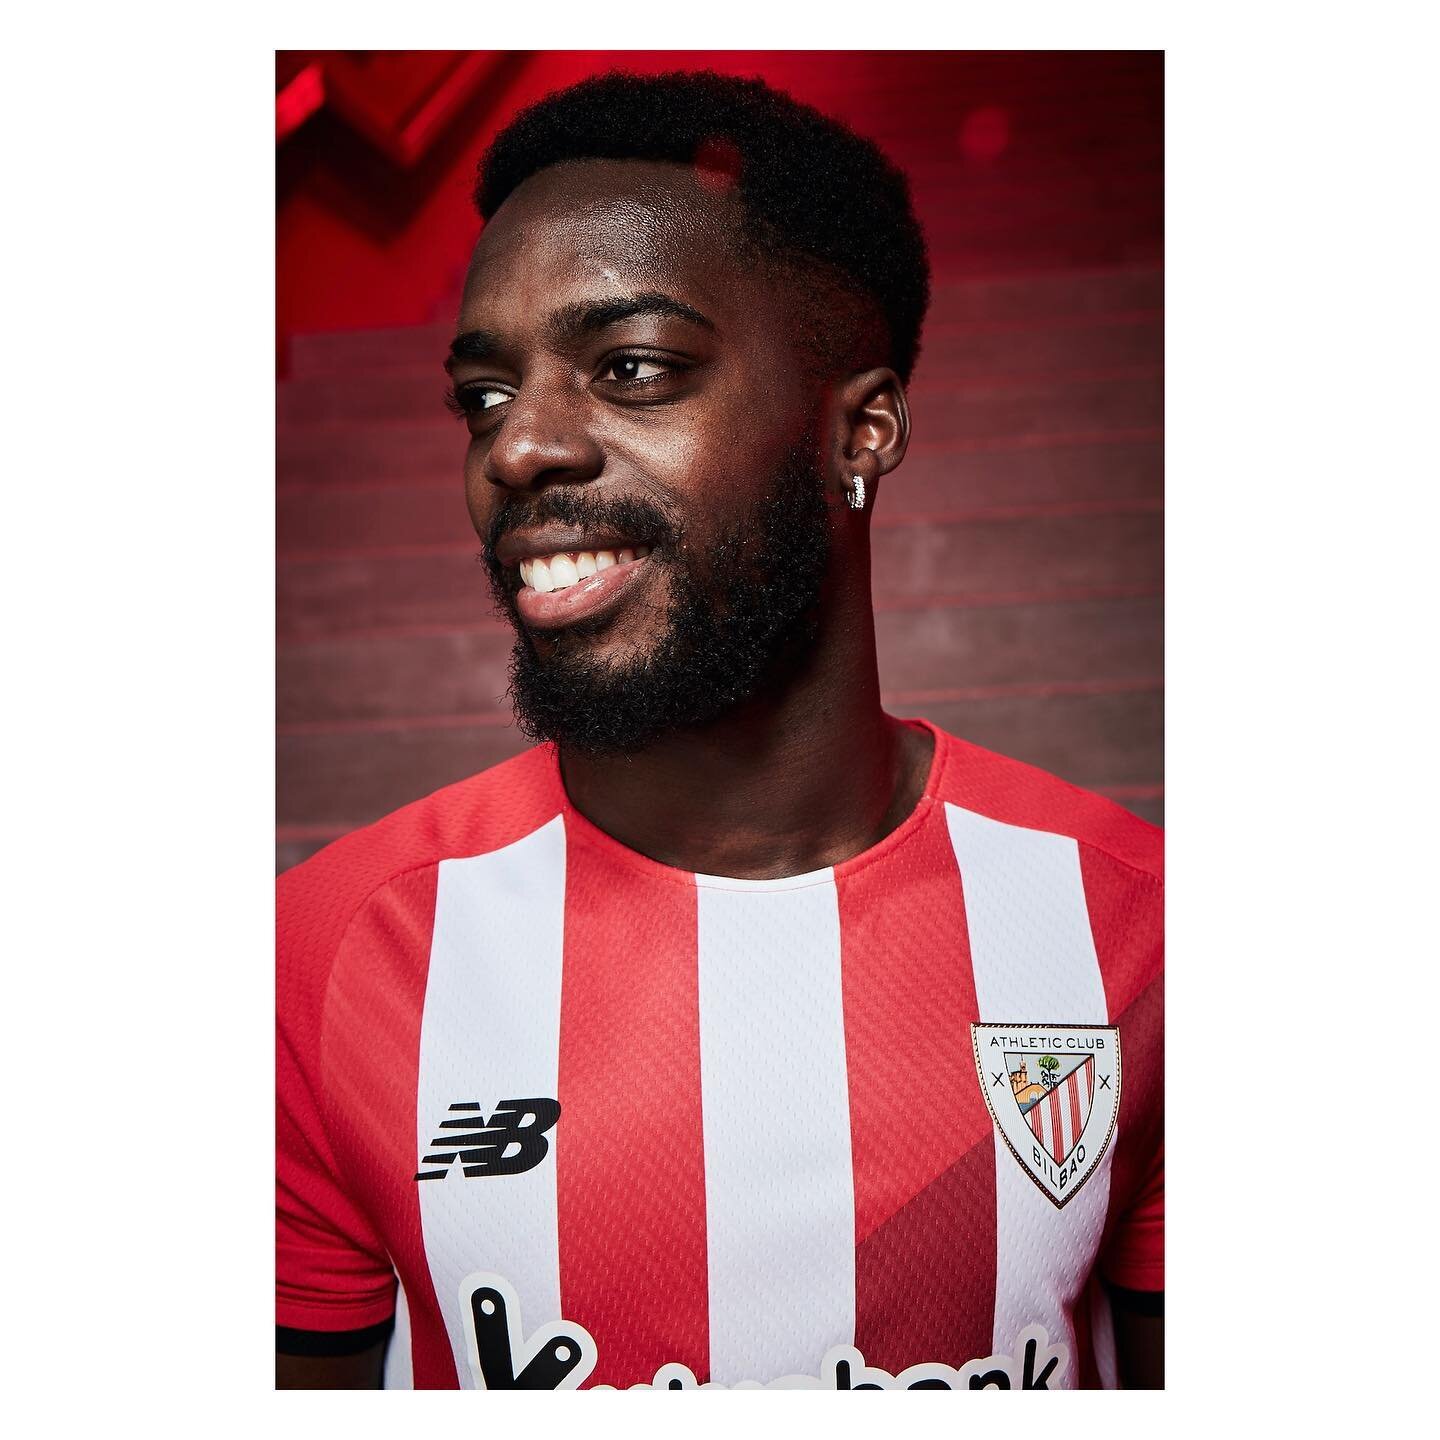 Massive congratulations to I&ntilde;aki Williams , 203 consecutive la liga games some record ! Pleasure shooting you for this years @athleticclub @newbalancefootball kit launch . Best of luck for the rest of the season 🙌🙌..
.
.
.
.
#athleticclub #i